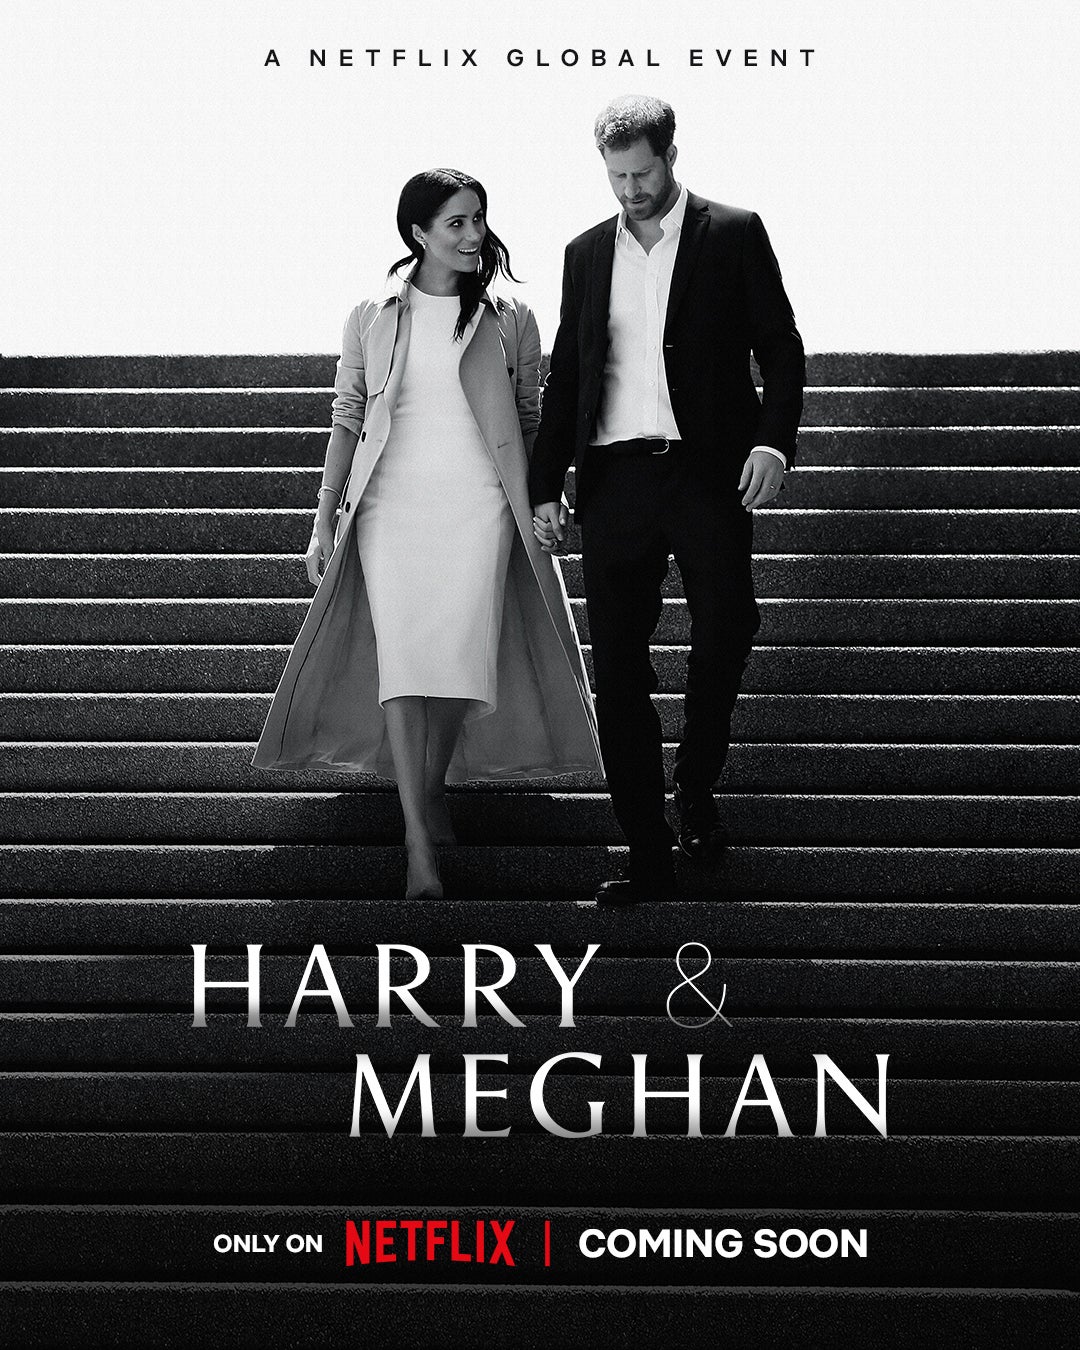 Netflix Unveils Official Trailer For New Series ‘Harry & Meghan’